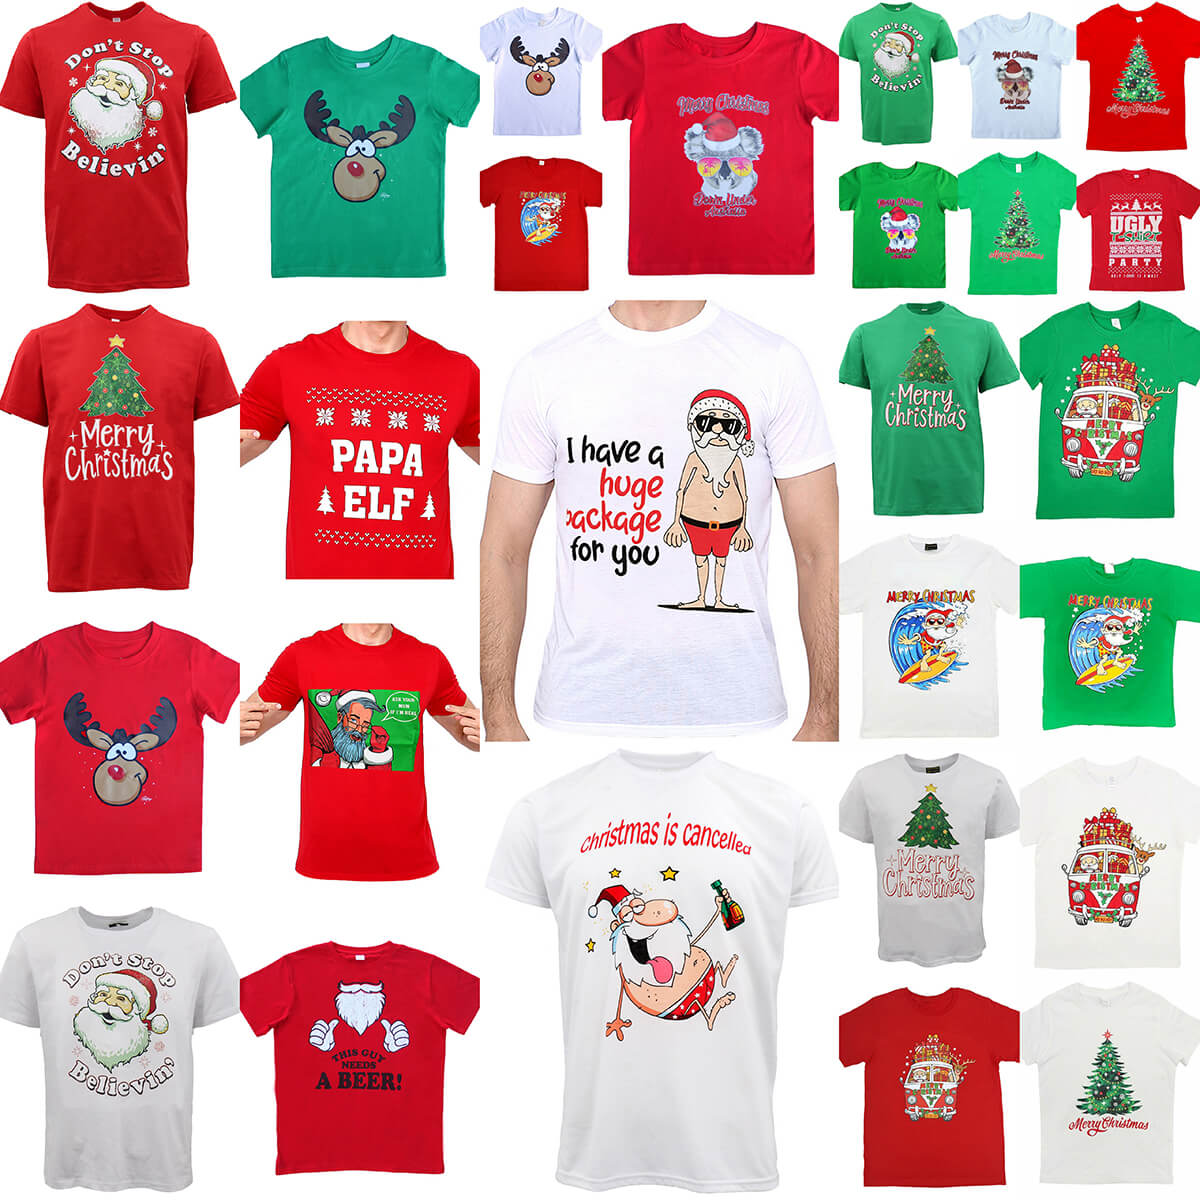 New Funny Adult Xmas Christmas T Shirt Tee Mens Womens 100% Cotton Jolly Ugly, Tree (Red) B, XS